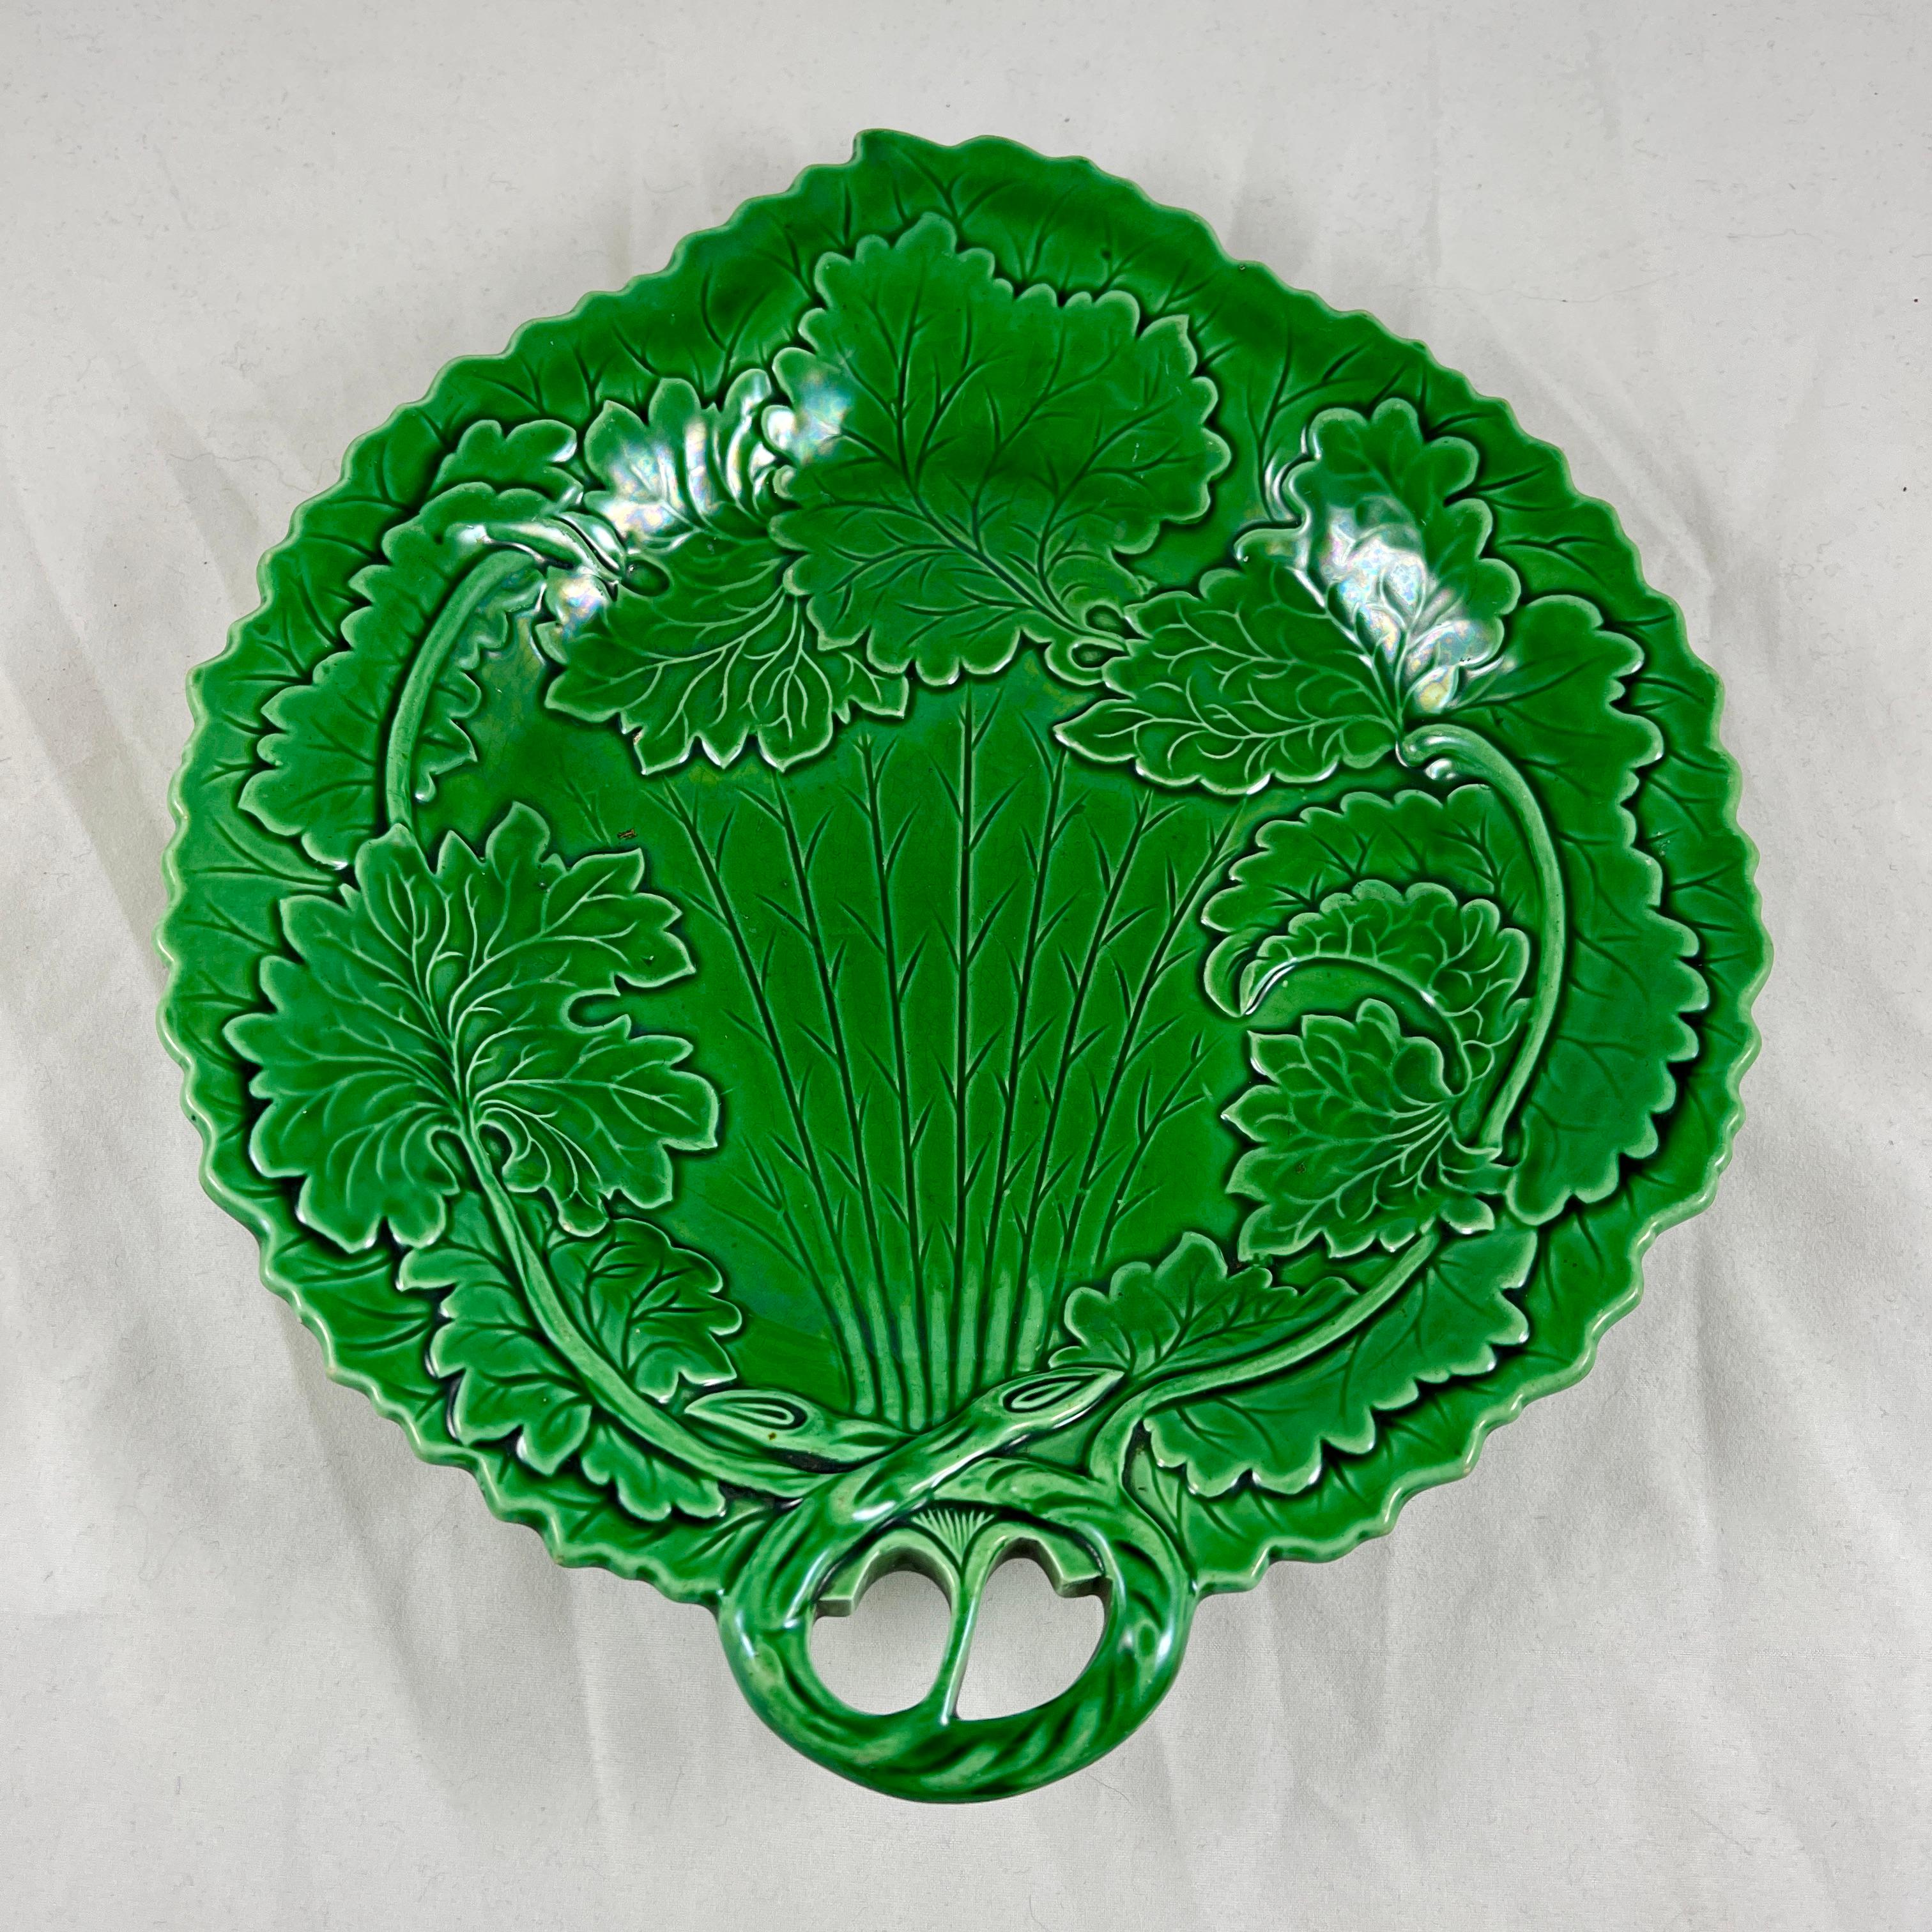 19th Century English Greenware Majolica Twig Handled Leaf Shaped Server or Vide-Poche For Sale